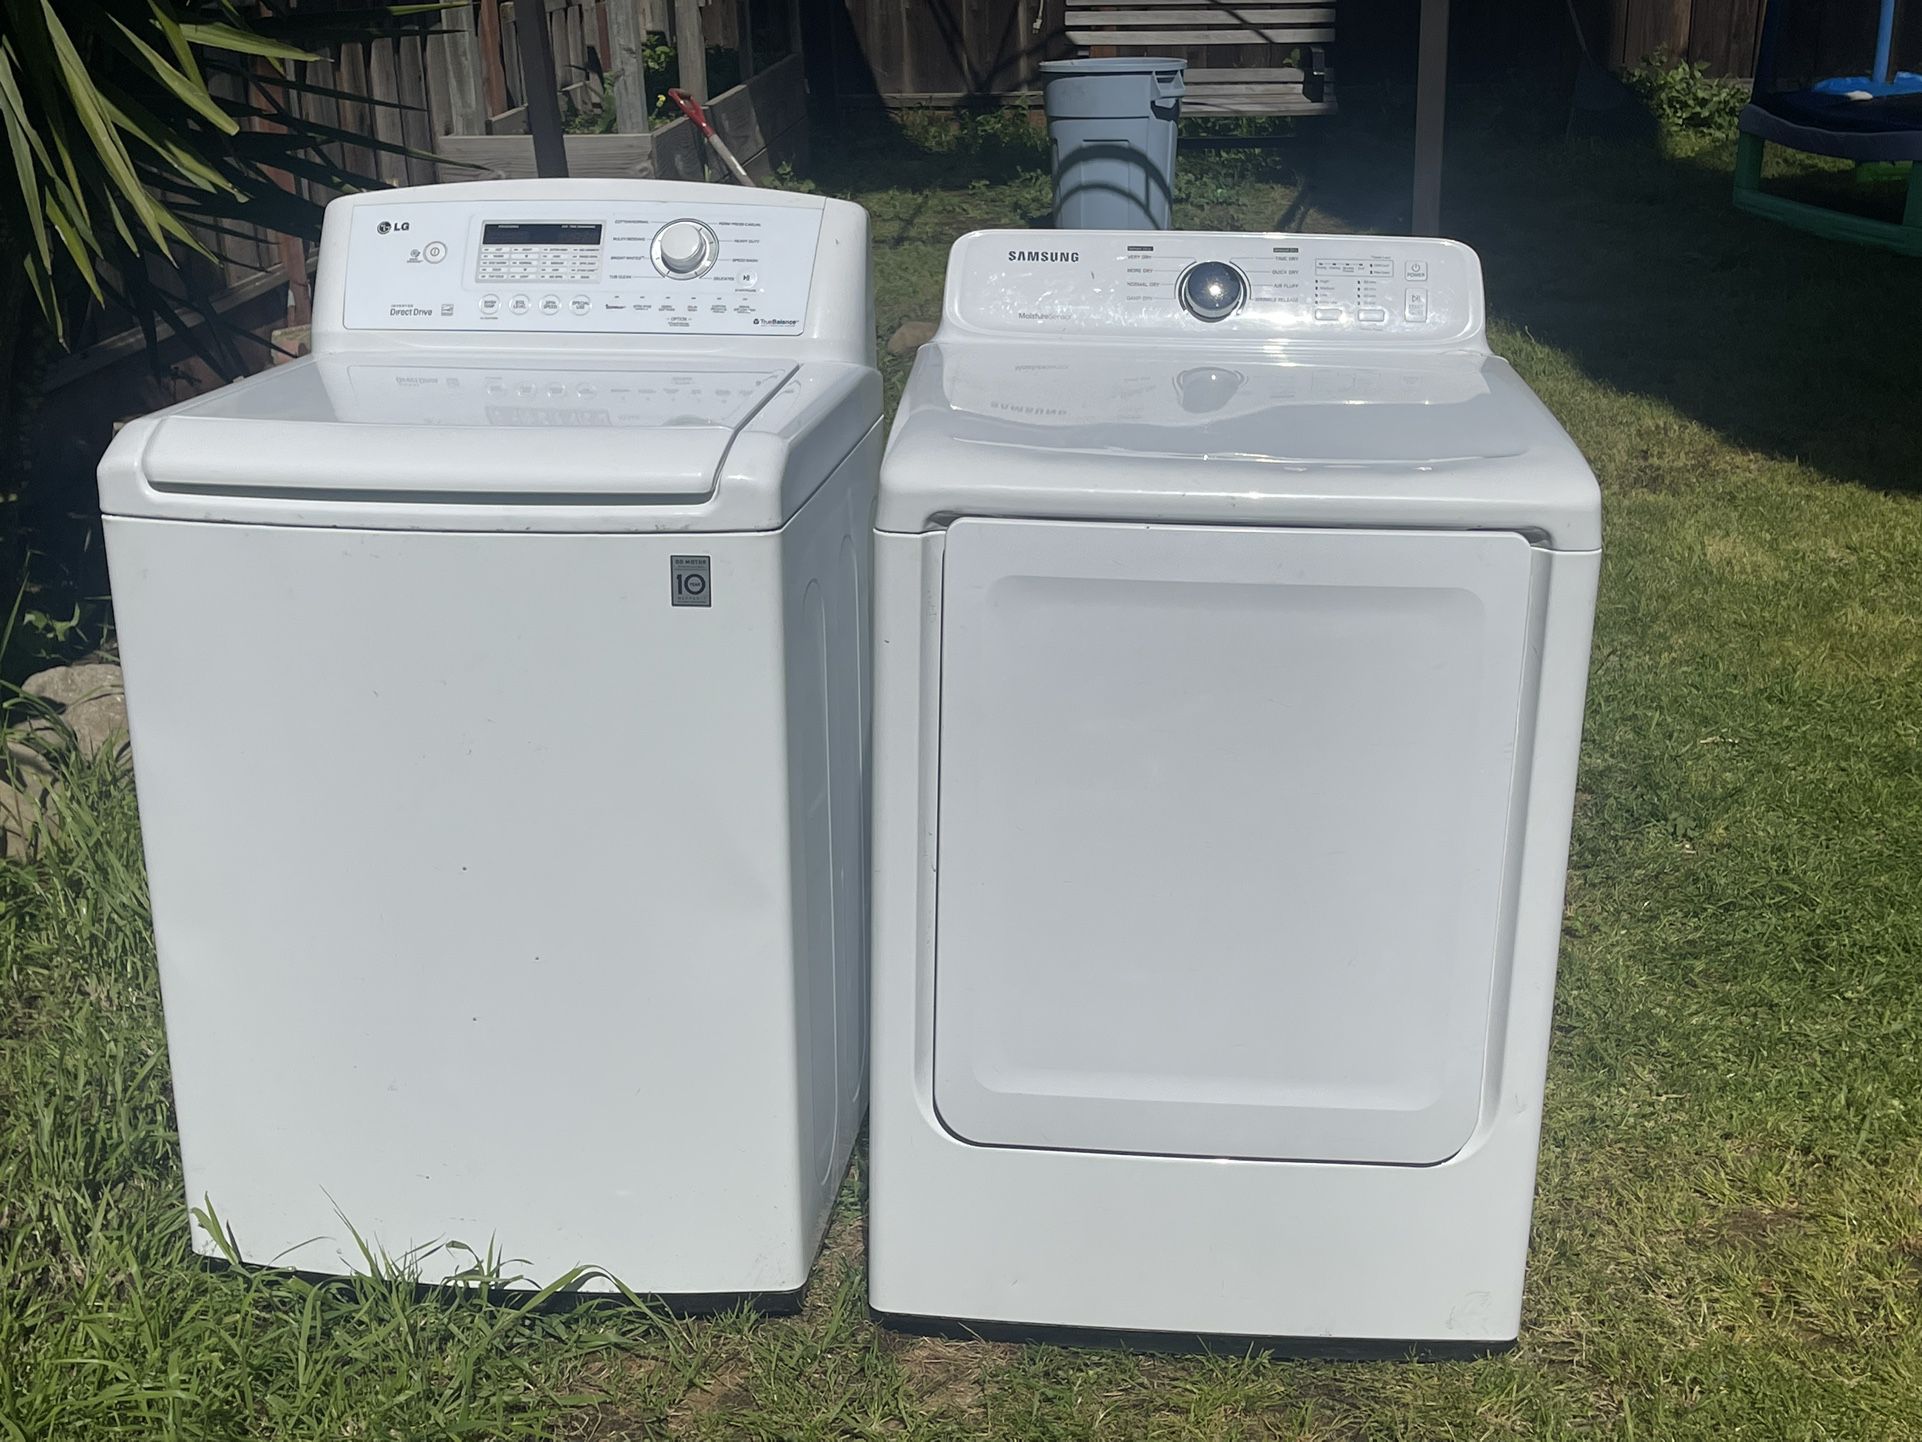 LG WASHER AND ELECTRIC DRYER 